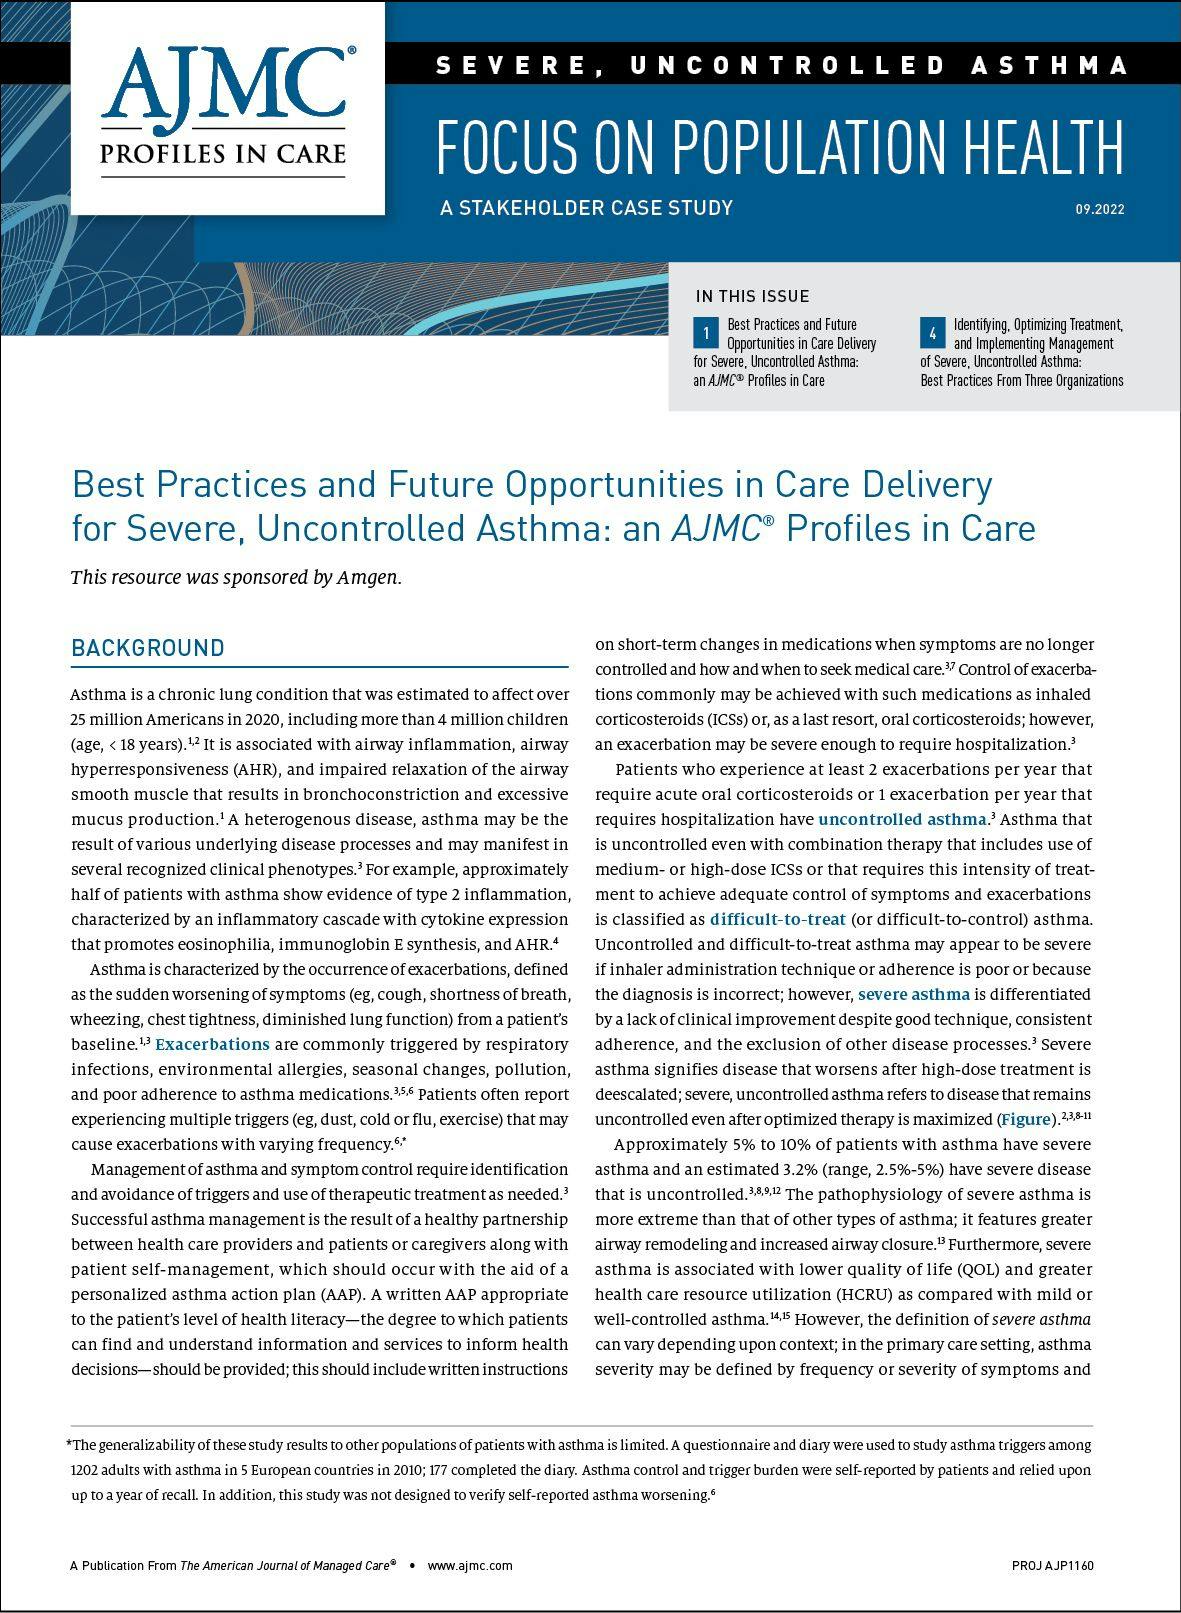 Best Practices and Future Opportunities in Care Delivery for Severe, Uncontrolled Asthma: an AJMC® Profiles in Care